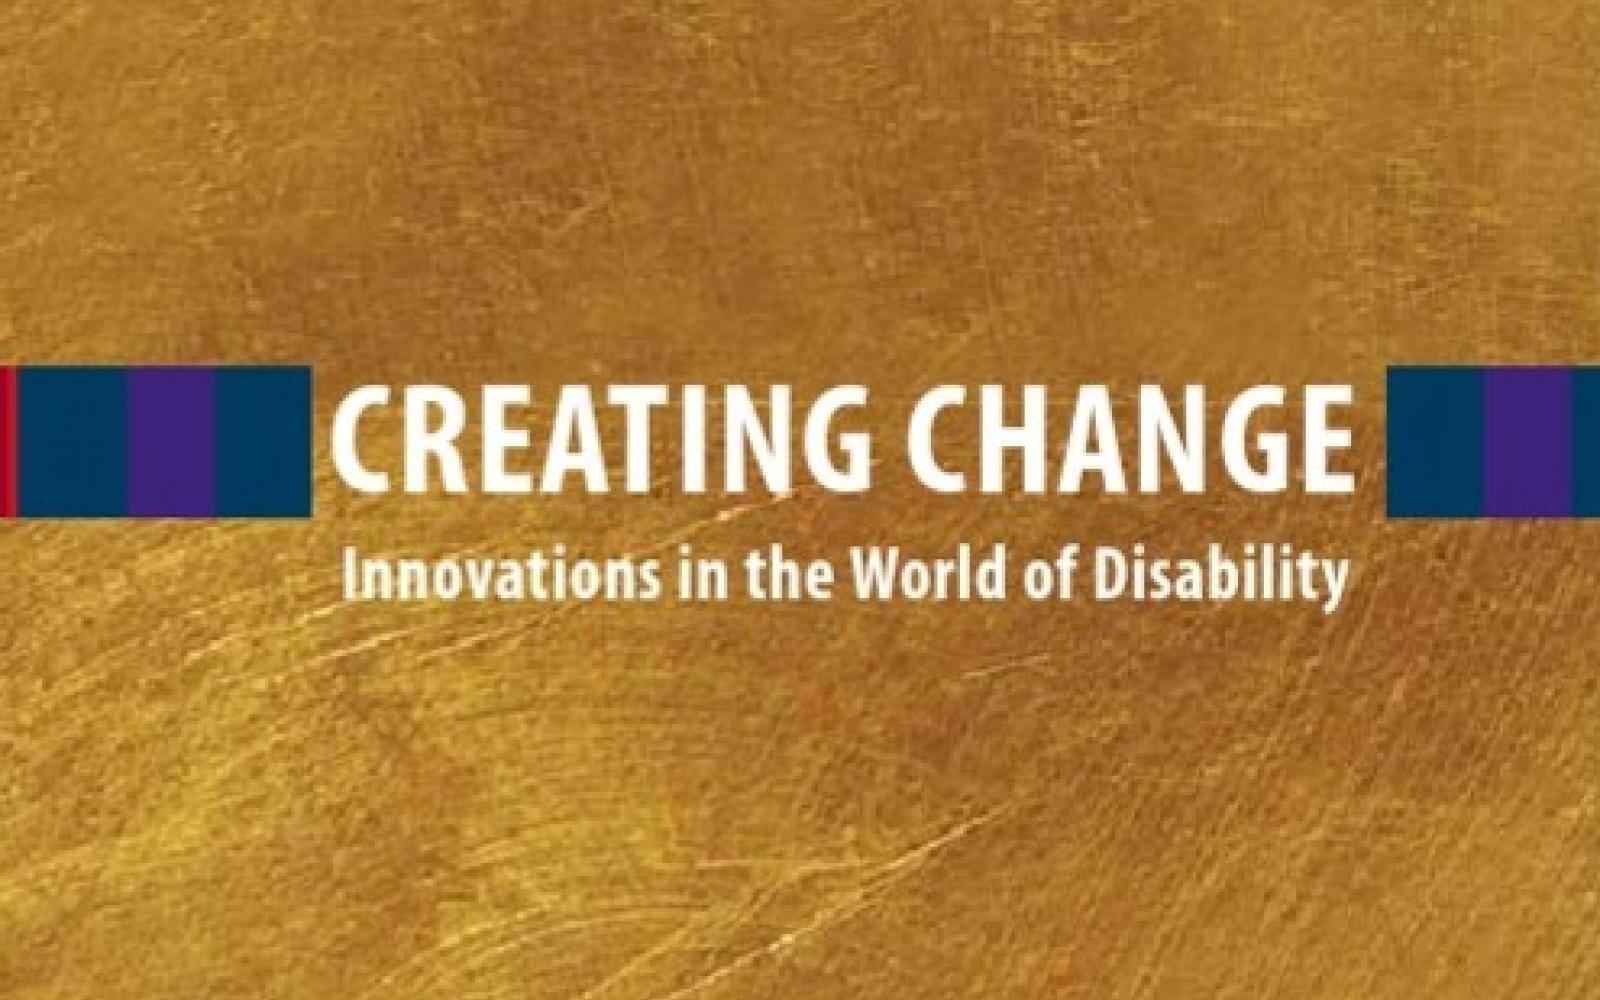 Innovations in the world of disabilities